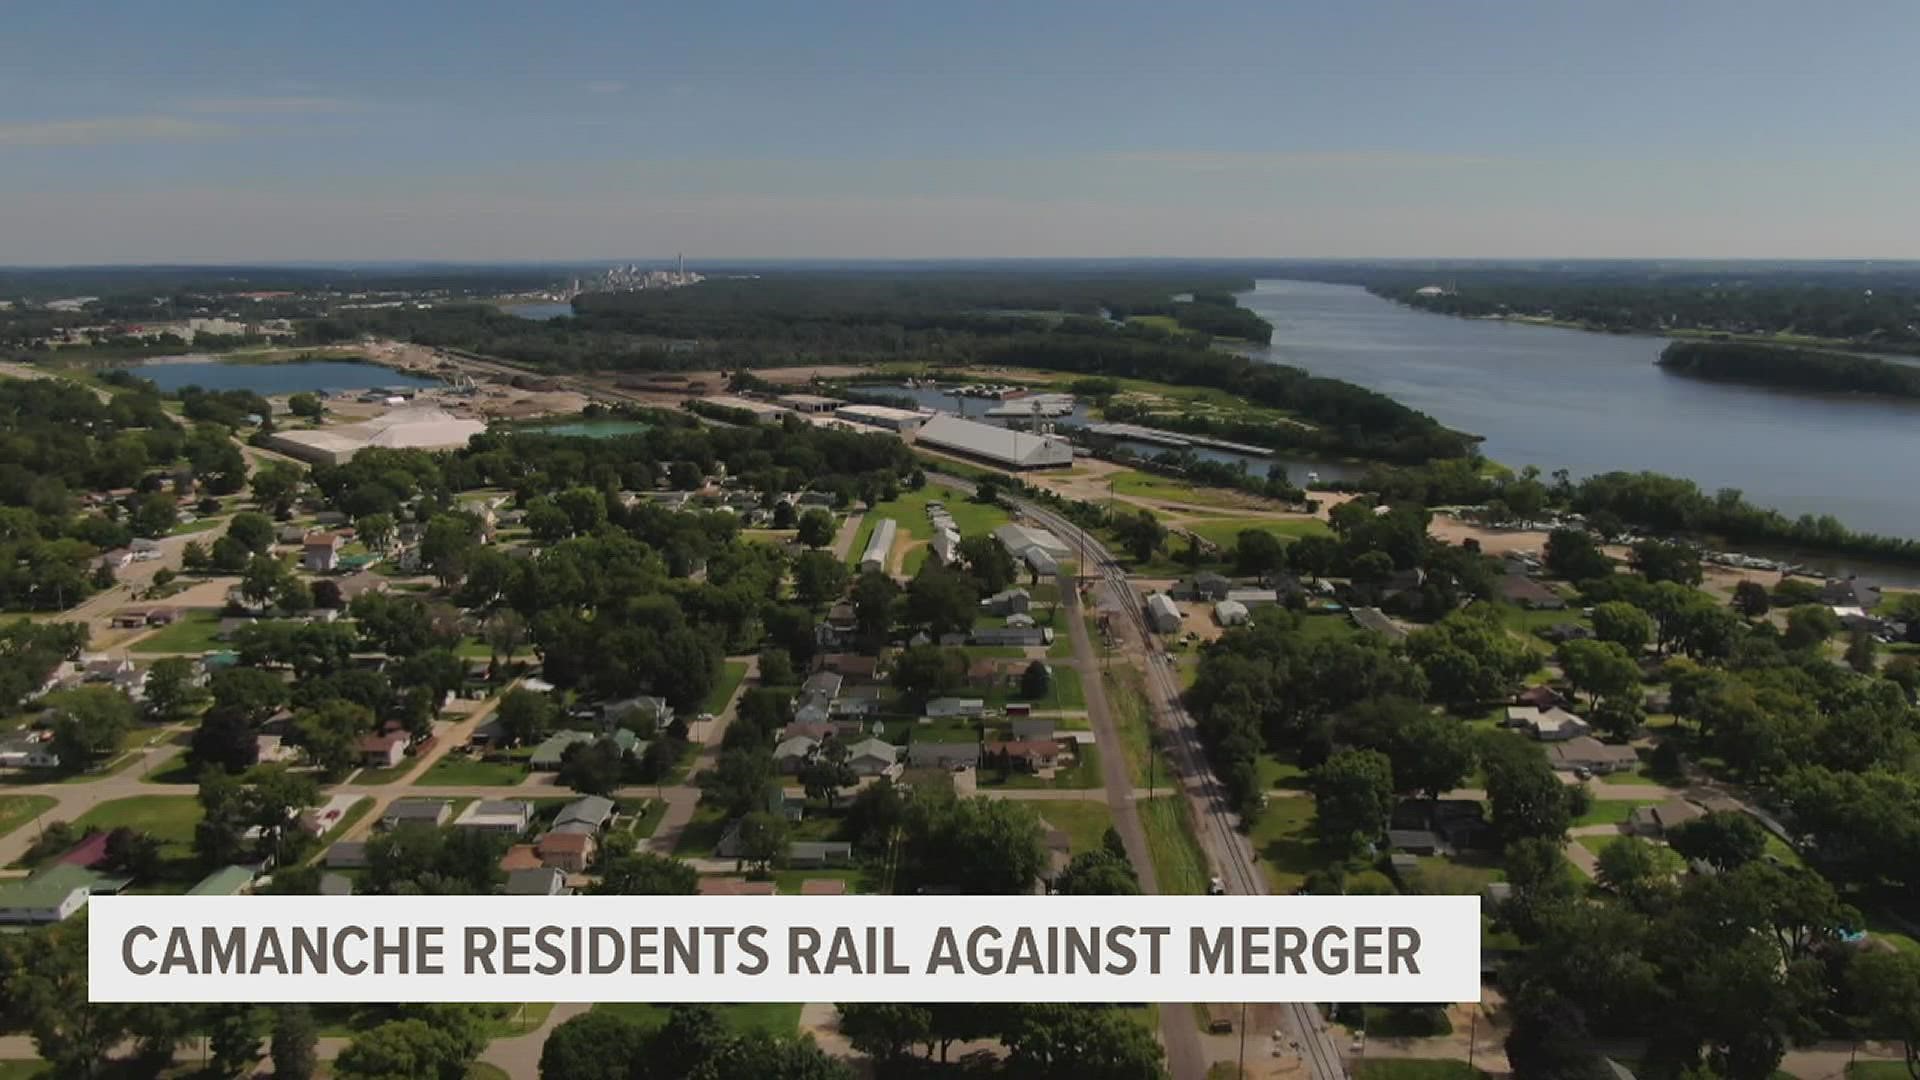 Camanche City Council hosted a meeting on Aug. 23 to gather public input on the proposed merger between the Canadian Pacific and Kansas City Southern railways.